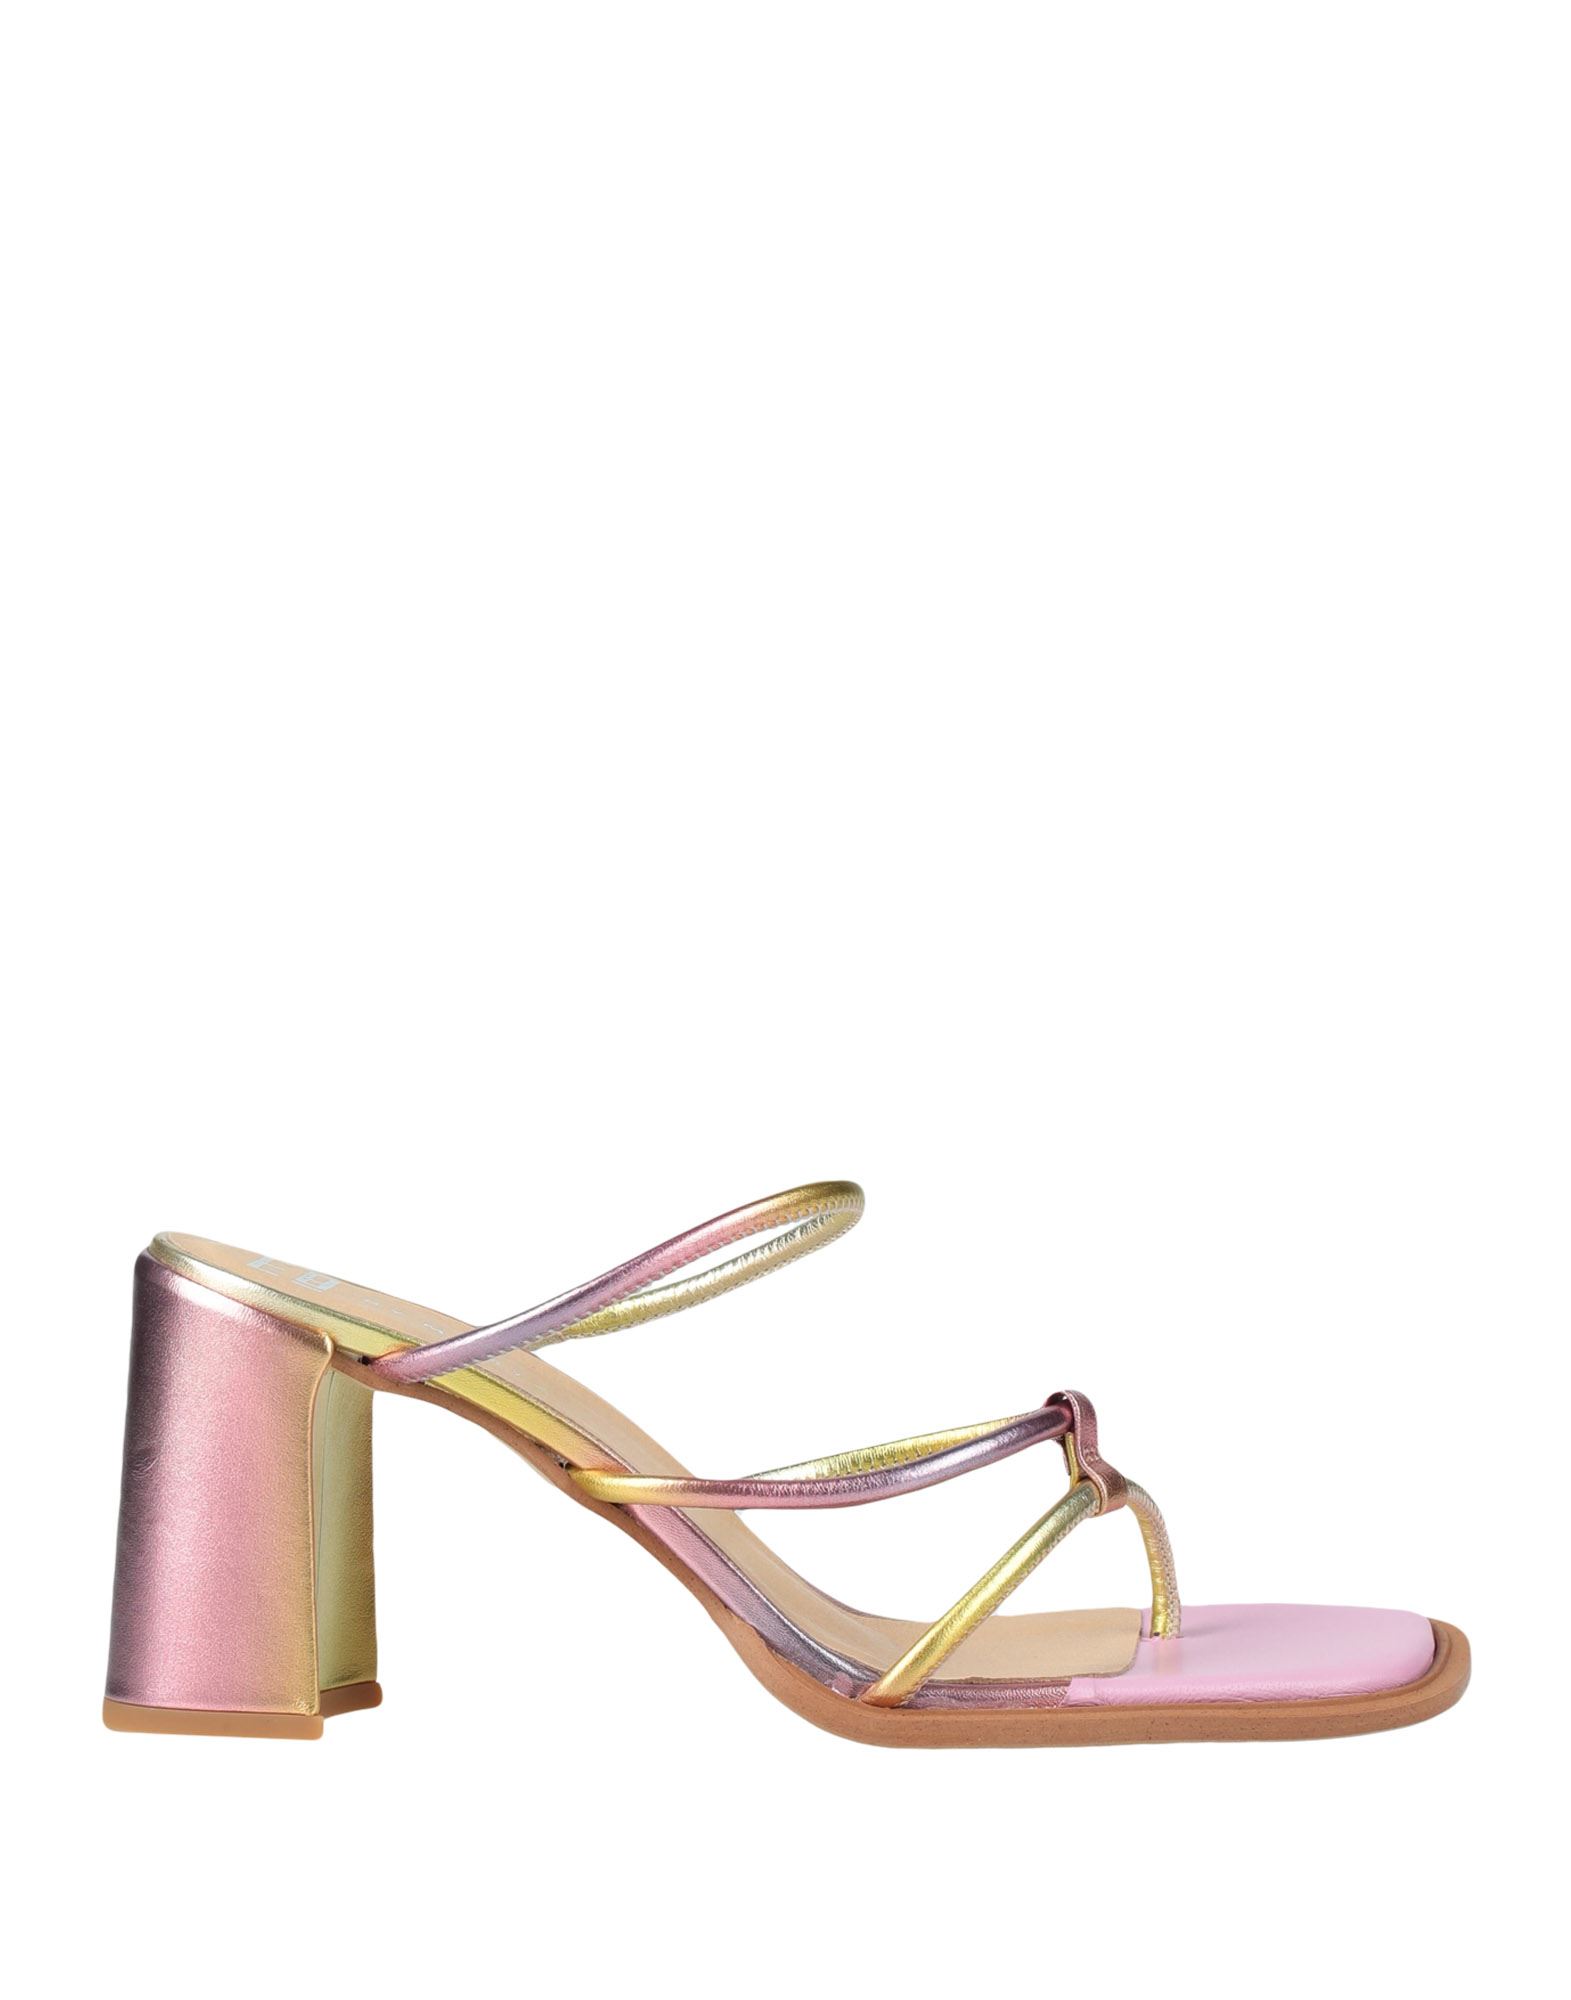 E8 By Miista Sandals In Gold